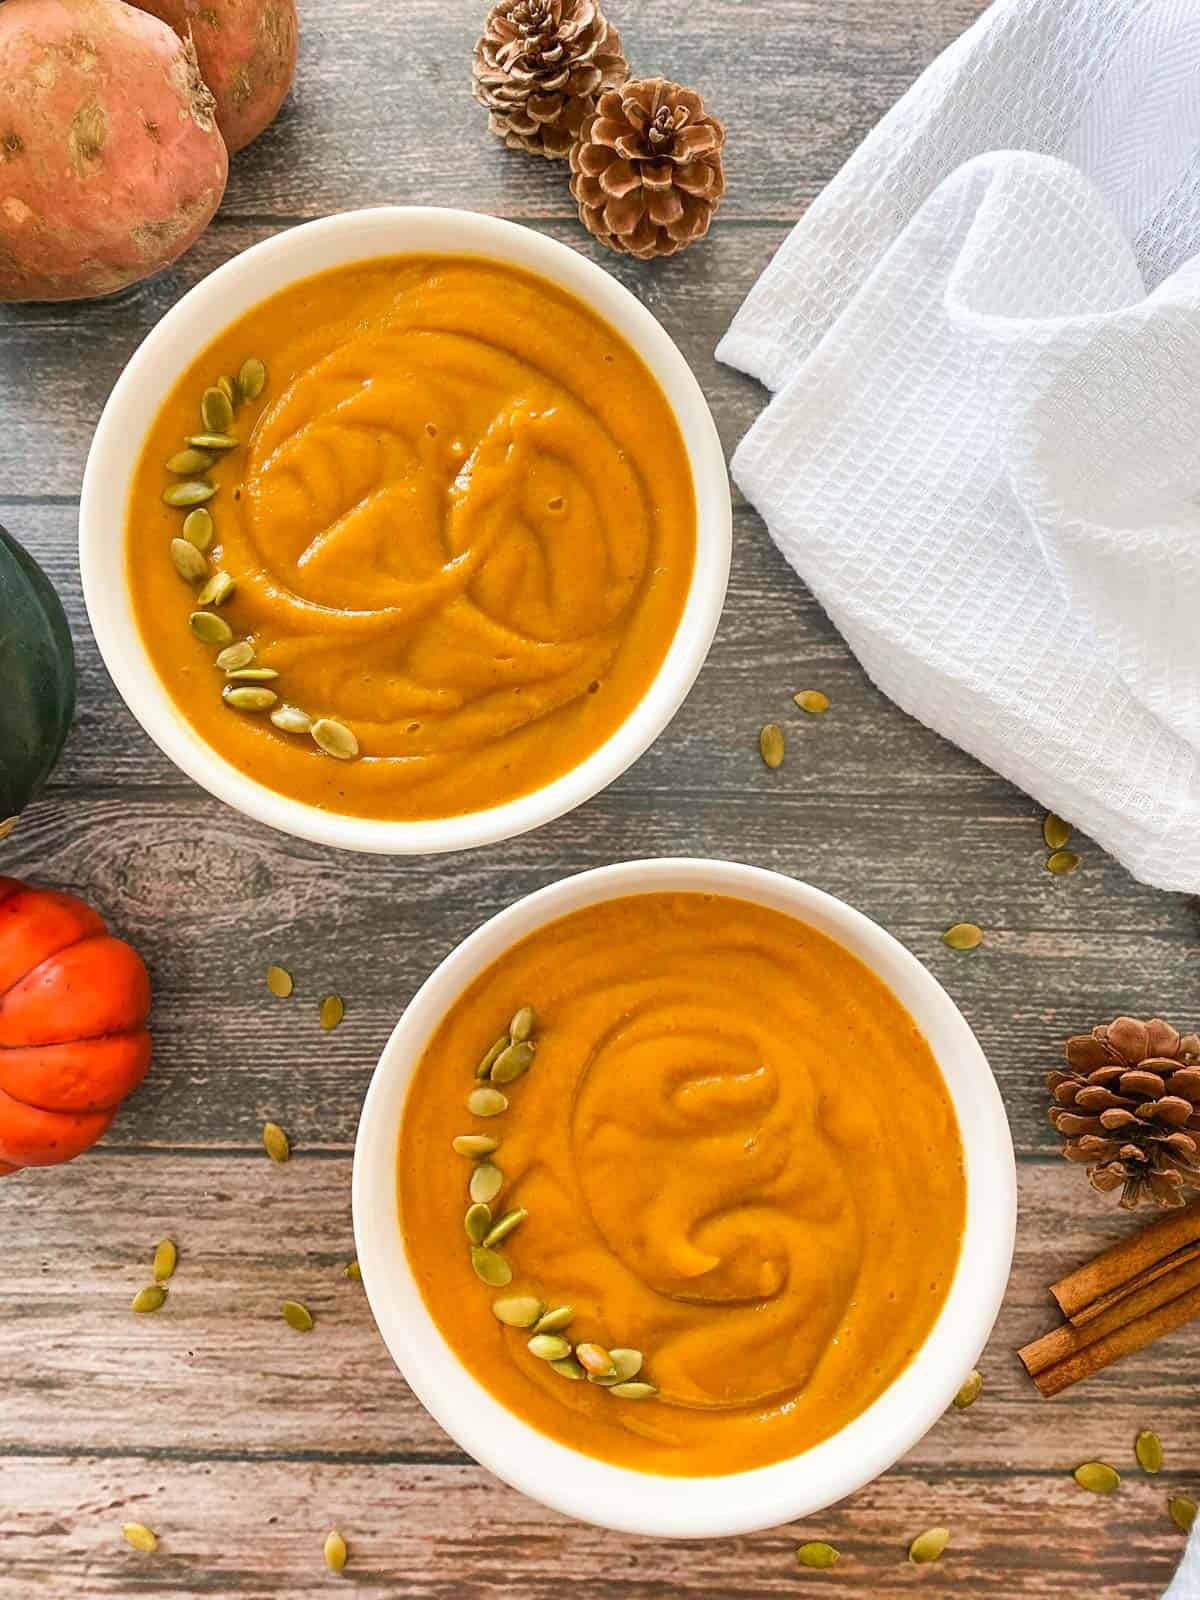 two bowls of pumpkin soup with pumpkin seeds garnished on top and white towel in background.